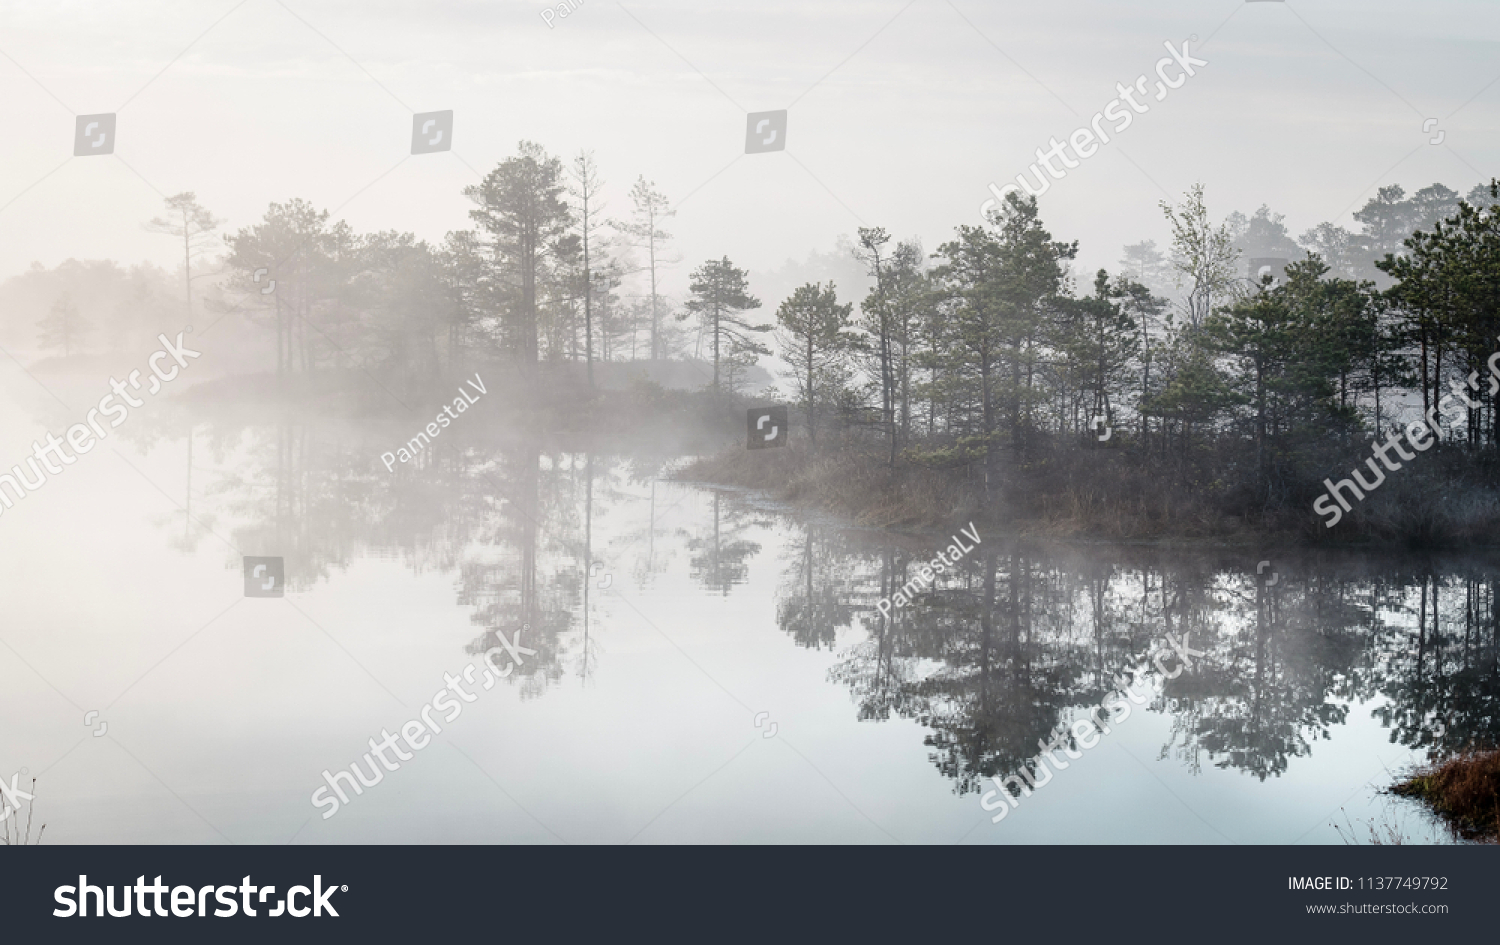 Mysterious forest at foggy morning in swamp area in Kemeri National Park, Latvia #1137749792